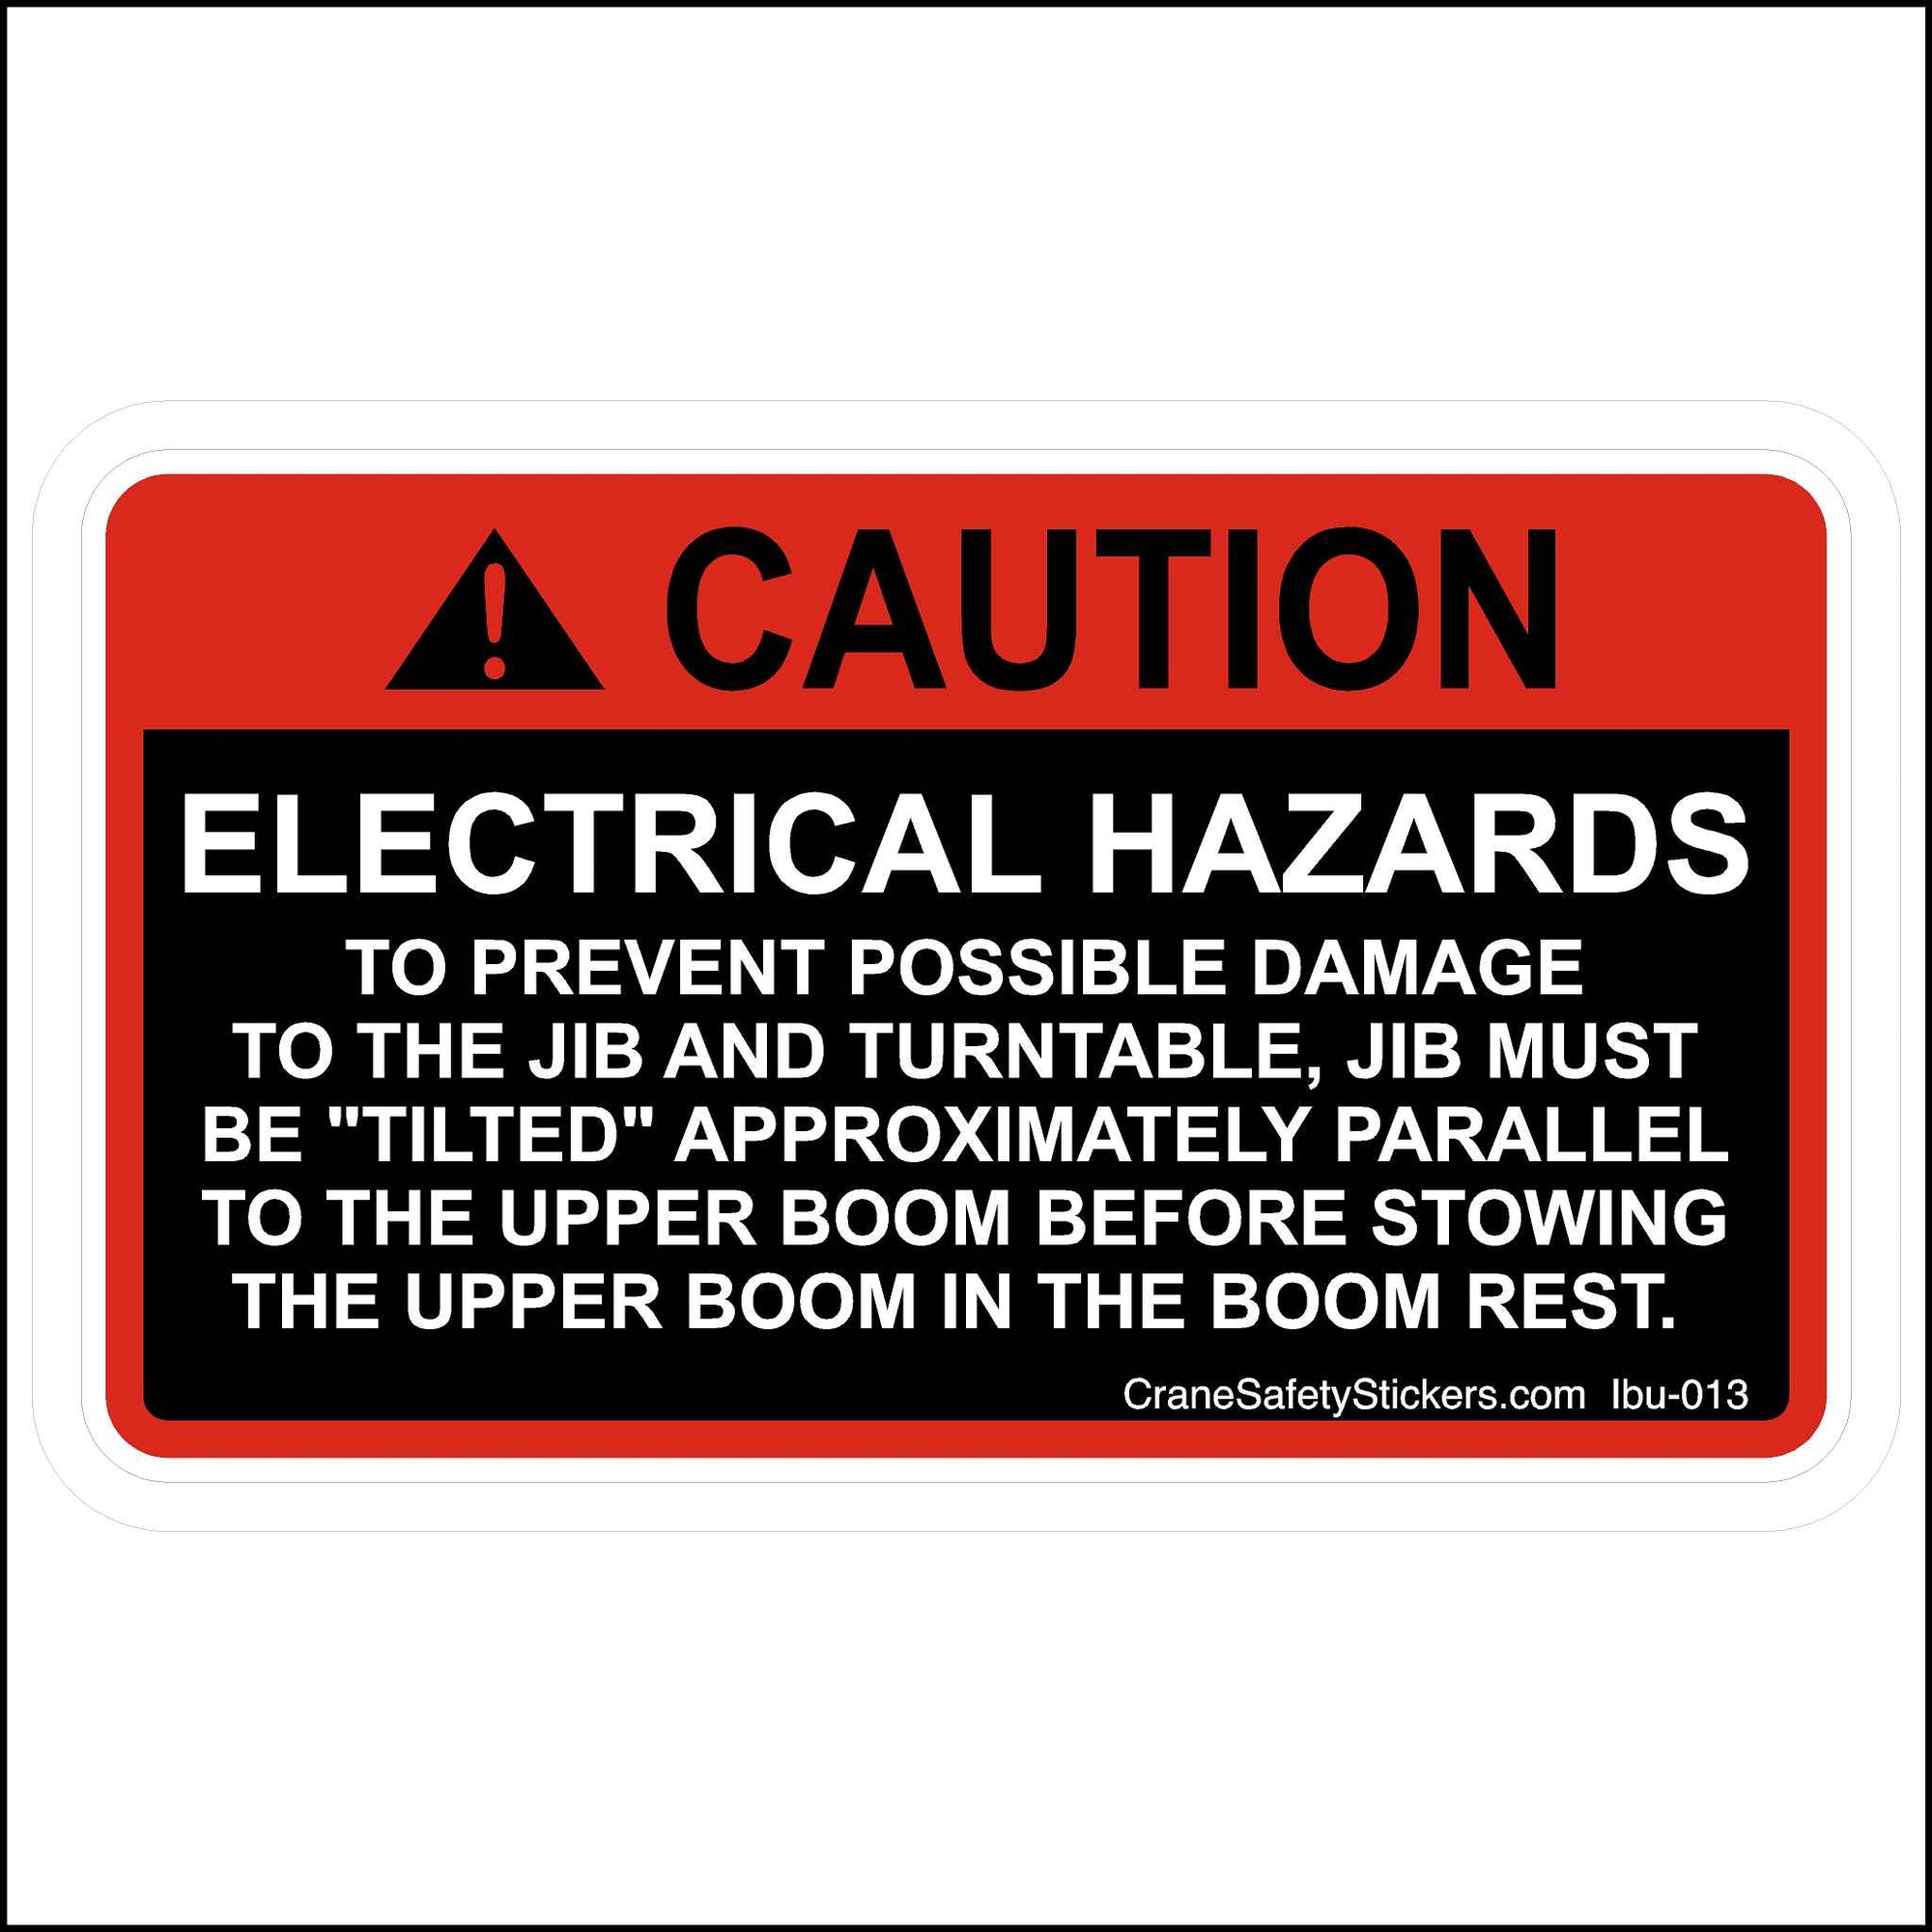 Jib and Turntable, Jib Must Be Tilted Parallel to the Upper Boom Before Stowing Sticker Printed With. CAUTION!  ELECTRICAL HAZARDS TO PREVENT POSSIBLE DAMAGE TO THE JIB AND TURNTABLE, JIB MUST BE "TILTED" APPROXIMATELY PARALLEL TO THE UPPER BOOM BEFORE STOWING THE UPPER BOOM IN THE BOOM REST.